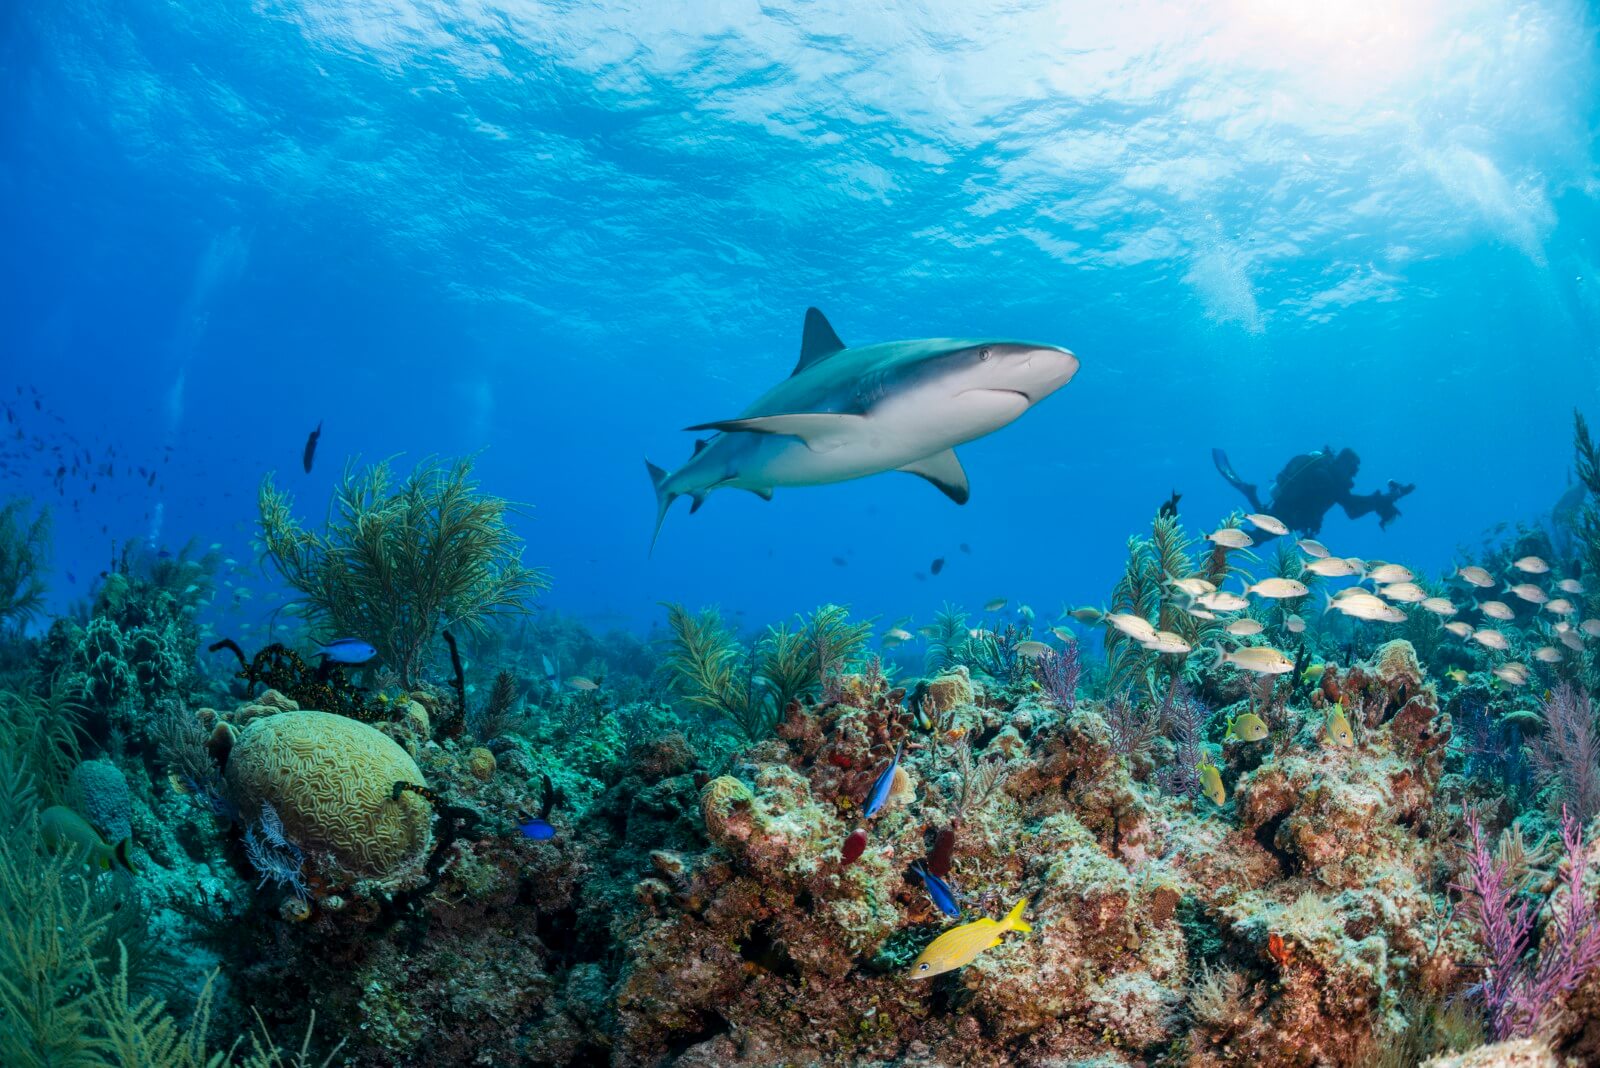 A Caribbean reef shark swimming over coral.